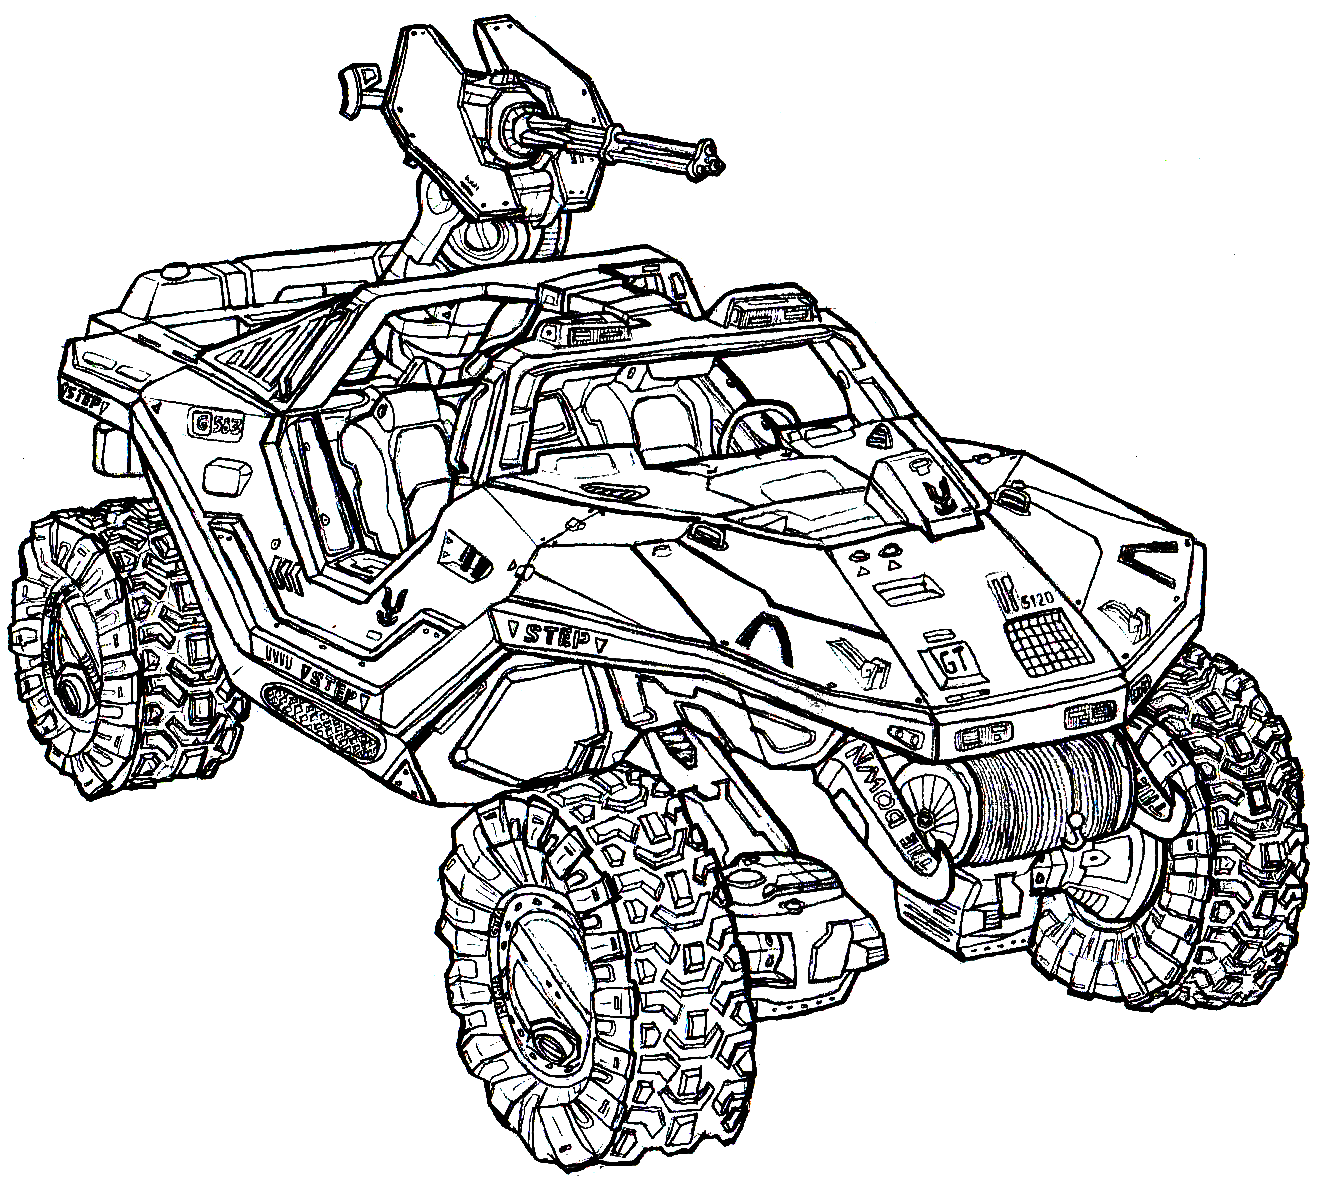 Halo 5 Coloring Pages Halo Coloring Pages Halo 5 Coloring Pictures